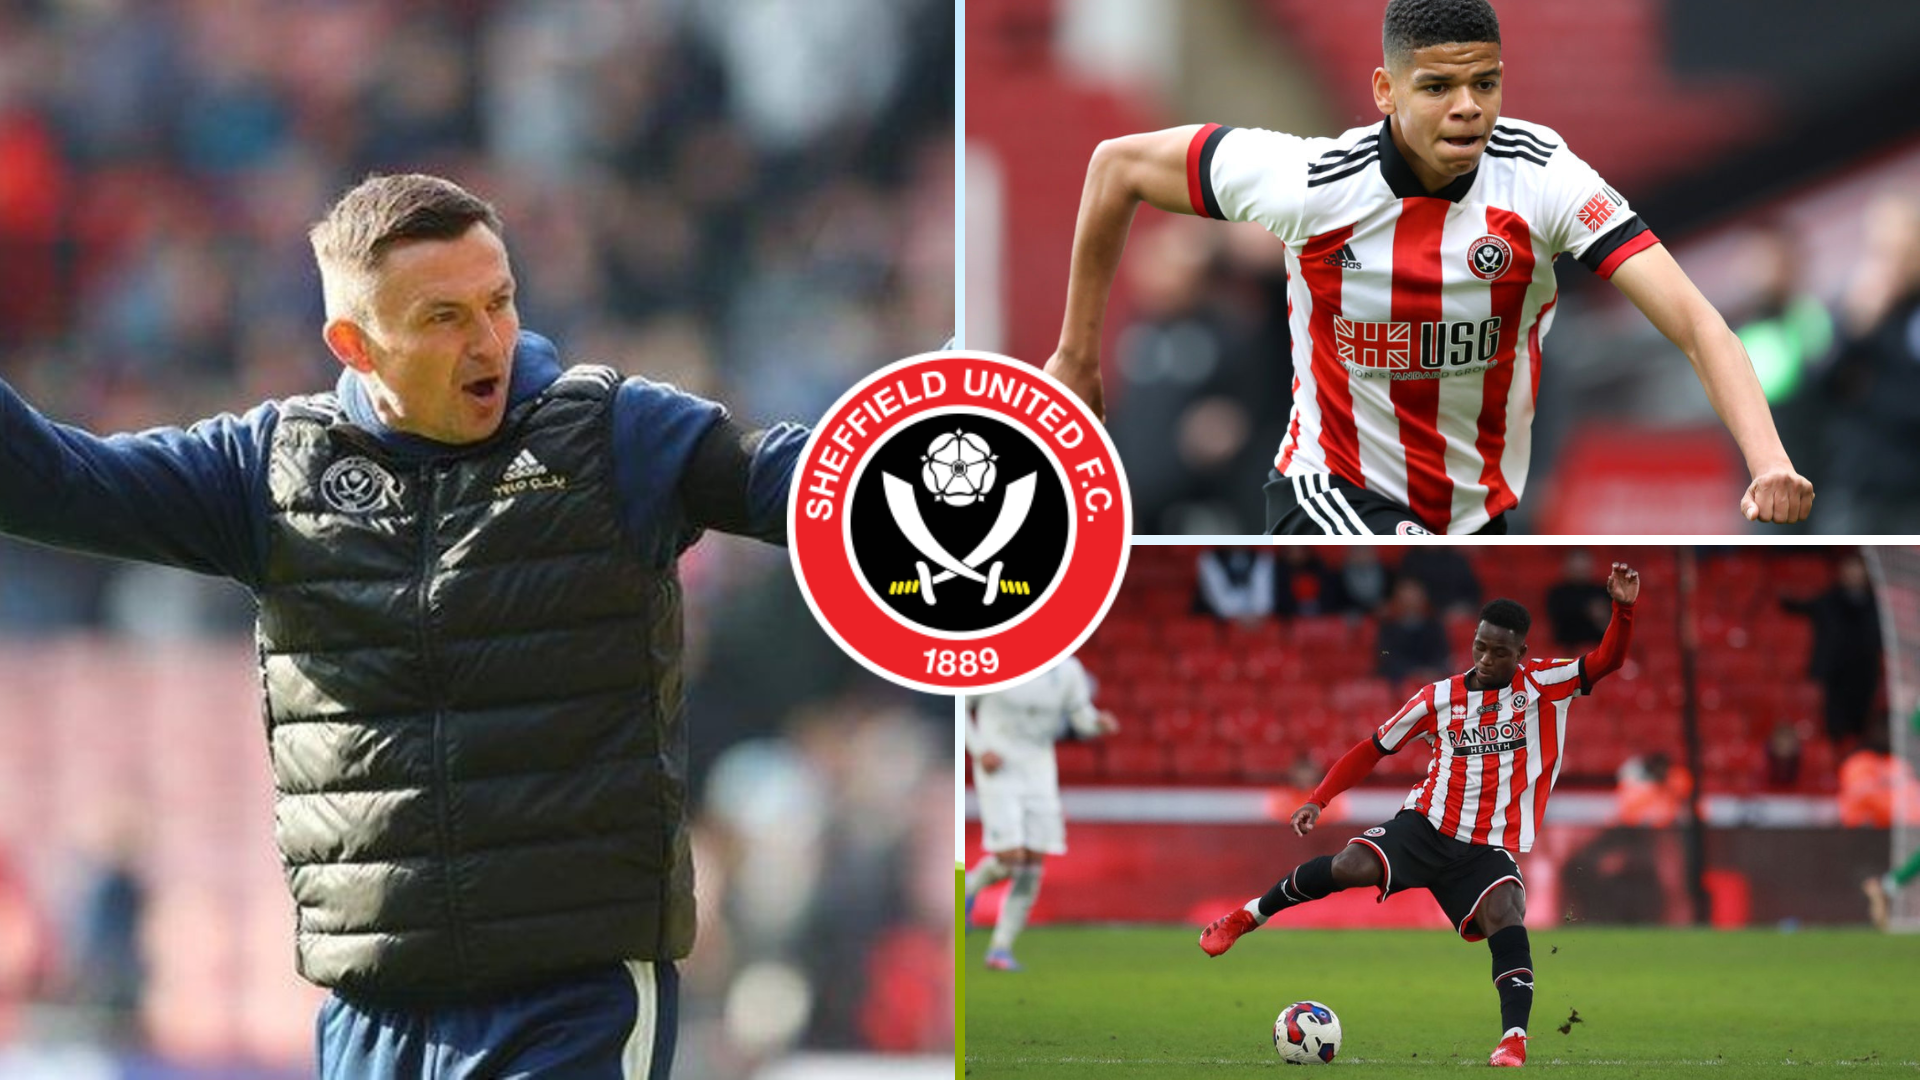 2 wonderkids that Sheffield United could unleash in the 2023/24 season